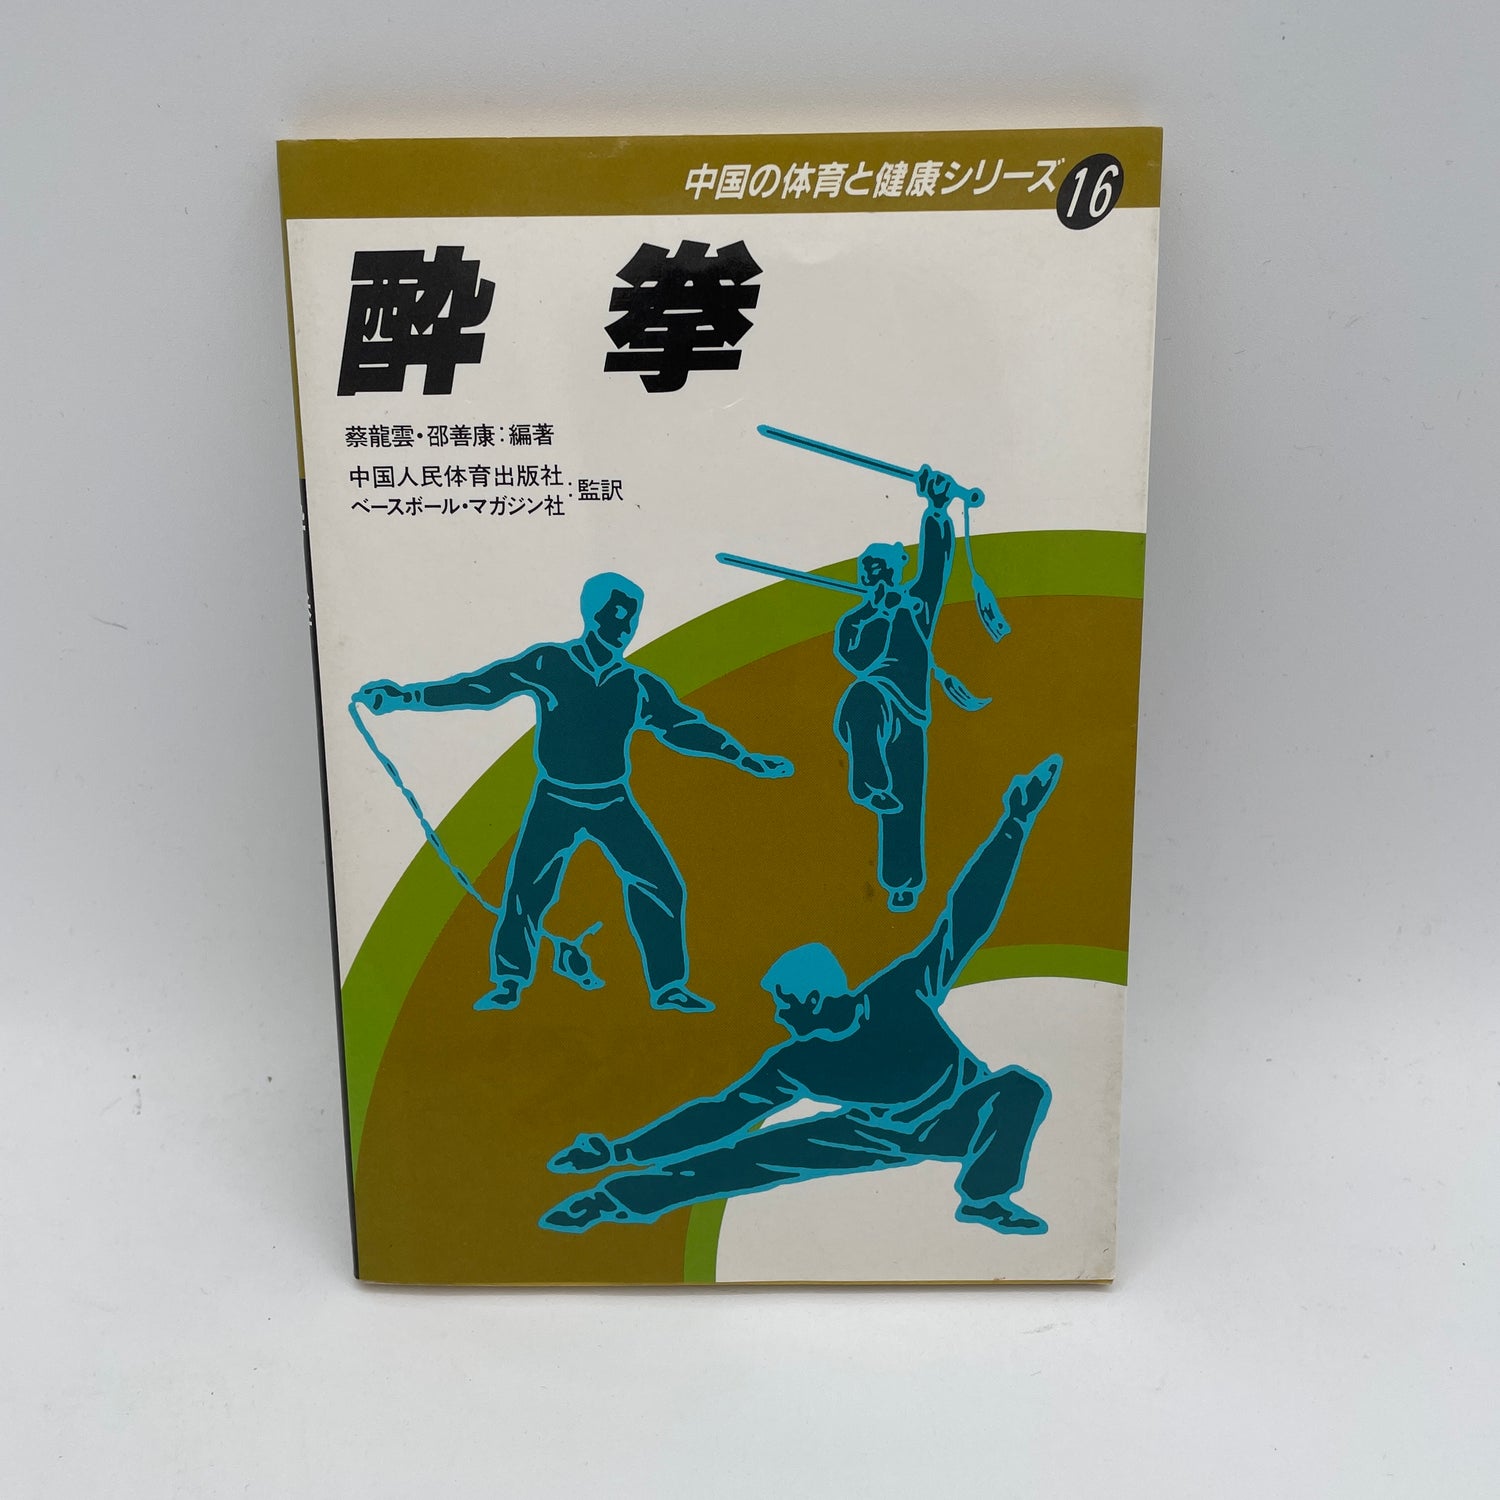 Yoi Ken (Drunken Kung Fu): Chinese Physical Education & Health Series #16 Book (Preowned)